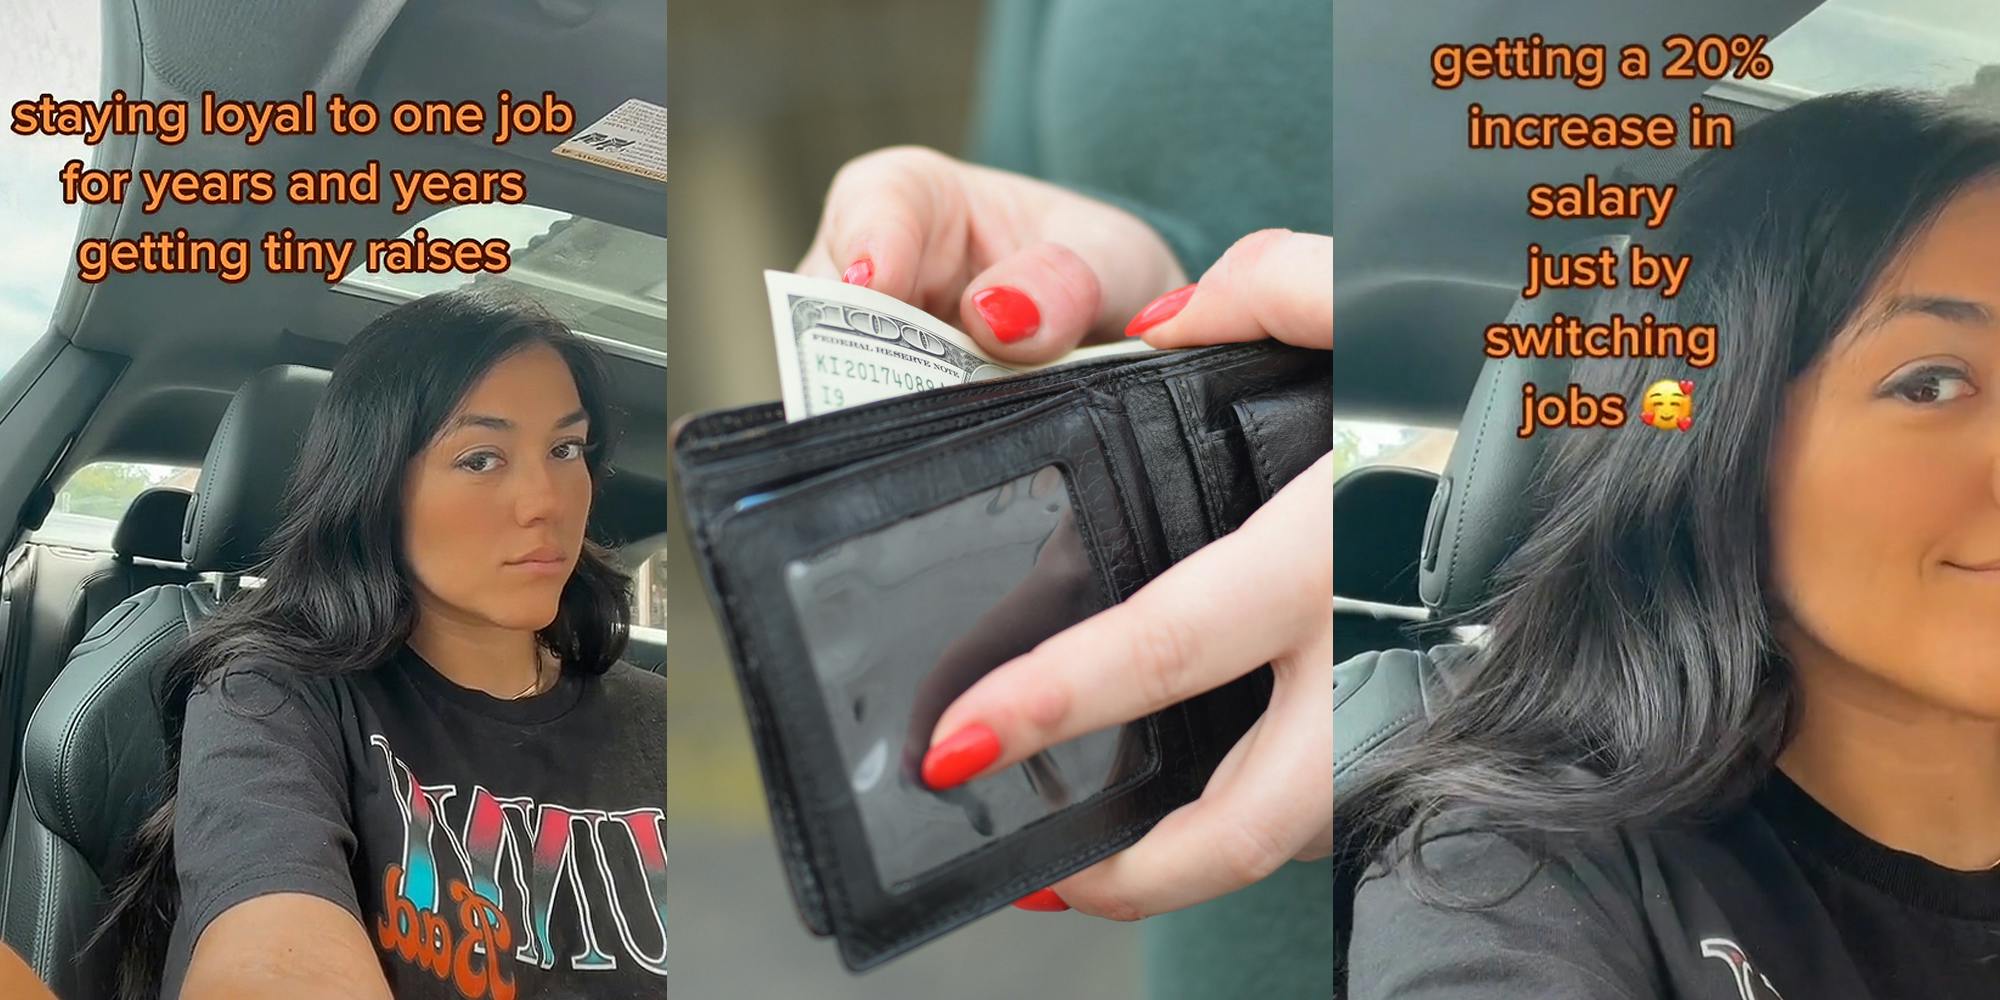 woman in car caption "staying loyal to one job for years and years getting tiny raises (l) woman hands holding wallet with money (c) woman zoomed in smiling caption "getting a 20% increase in salary just by switching jobs" (r)